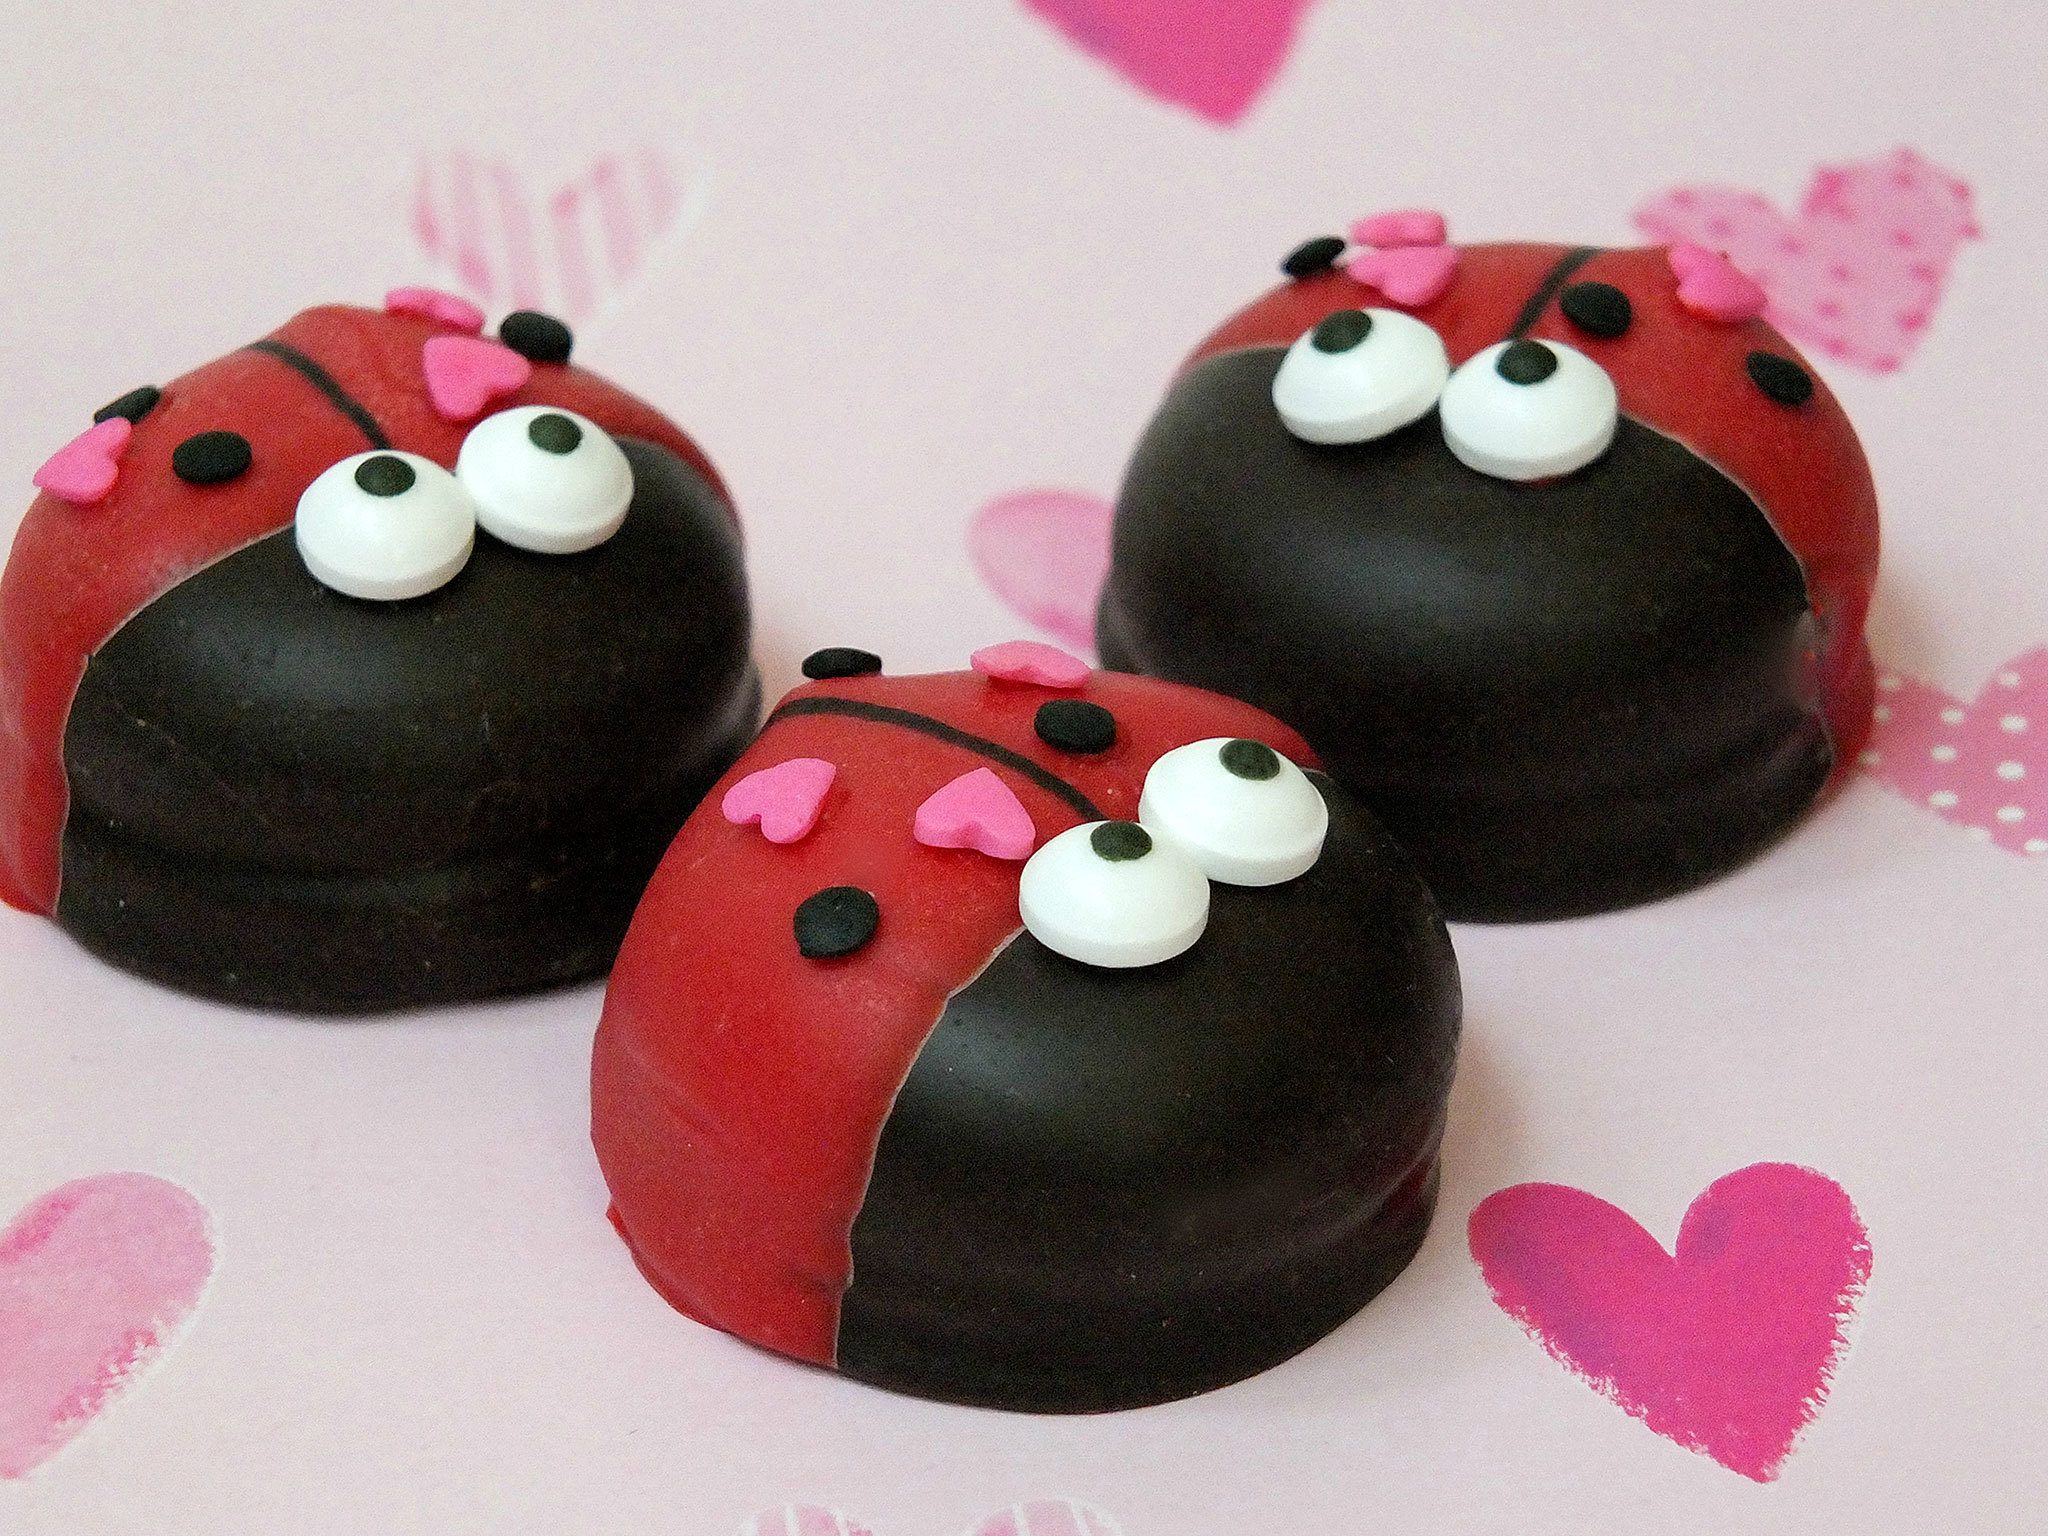 Love Bug Cookies are made with chocolate-covered marshmallow cookies. (Norene Cox photo)